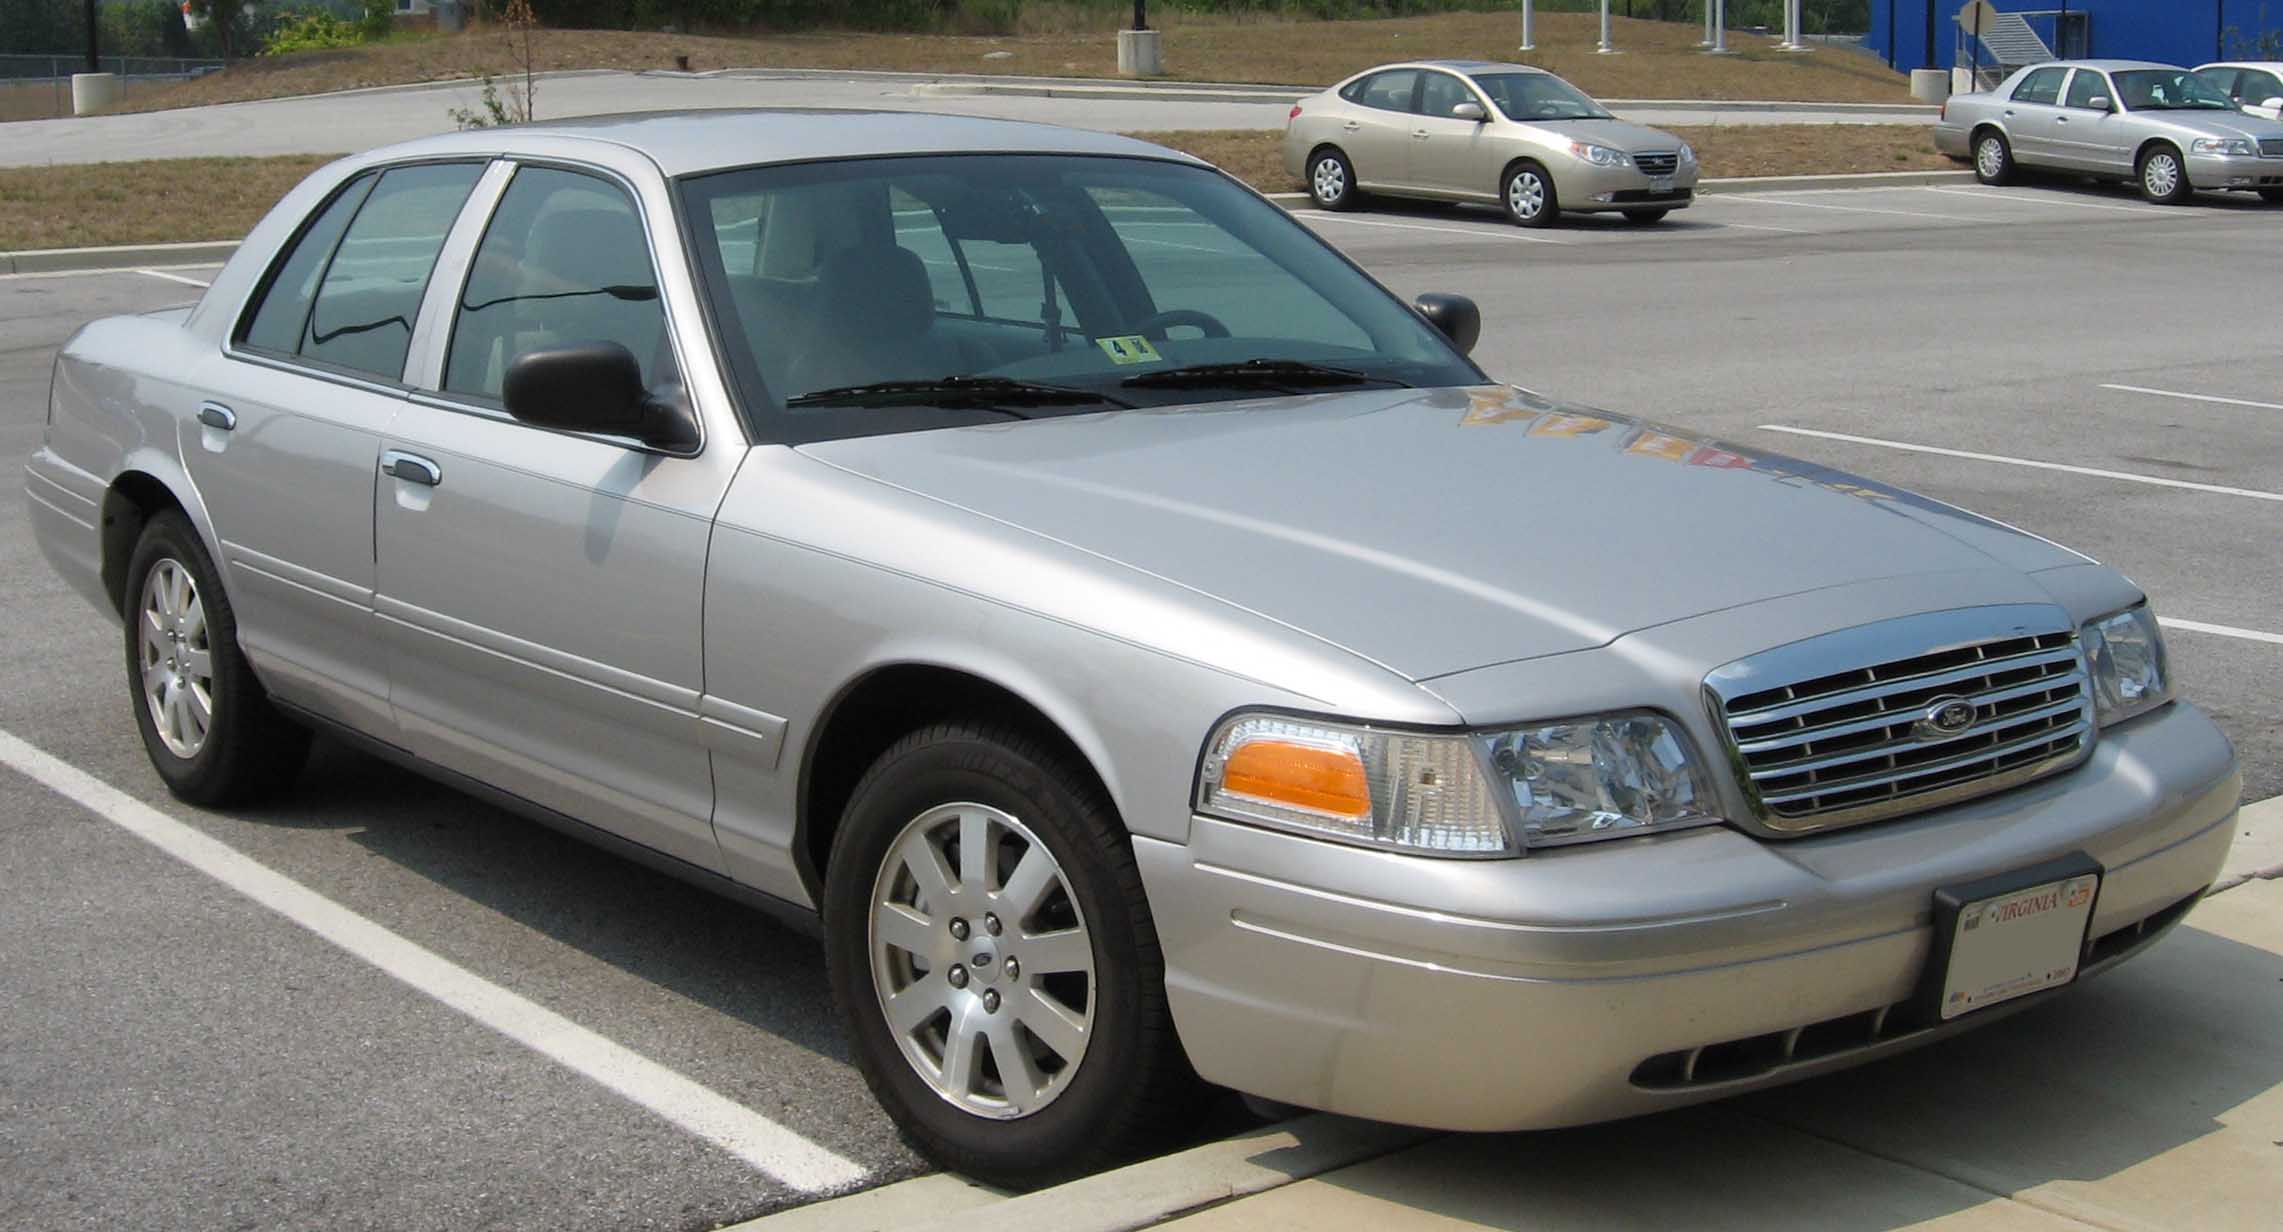 File:Ford Crown Victoria.jpg - Wikimedia Commons